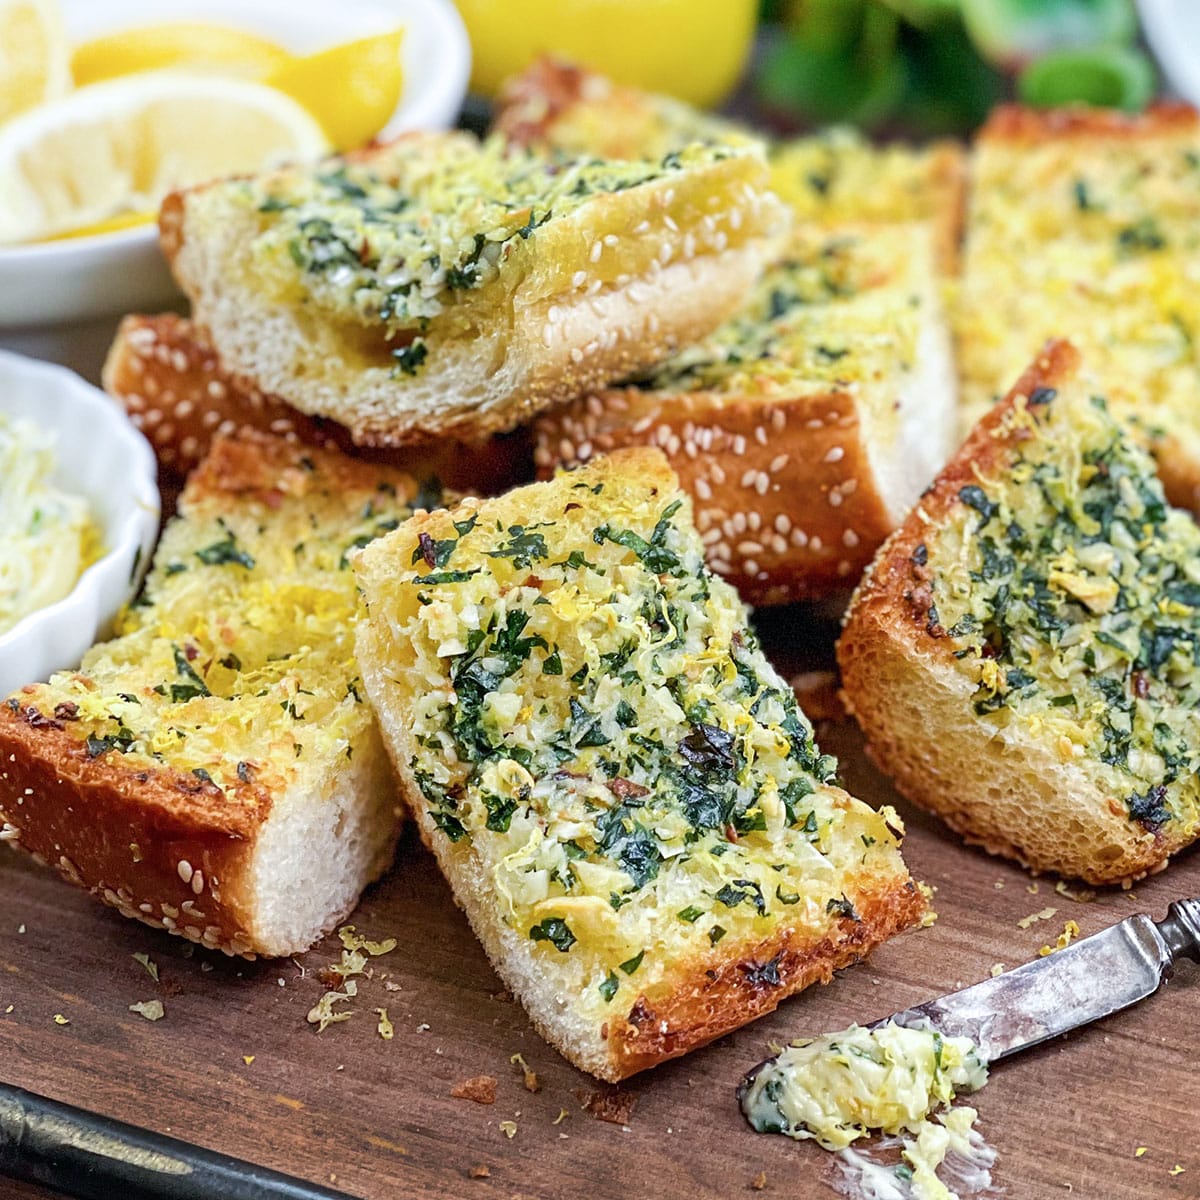 Slices of garlic bread with lemon zest and fresh parsley.